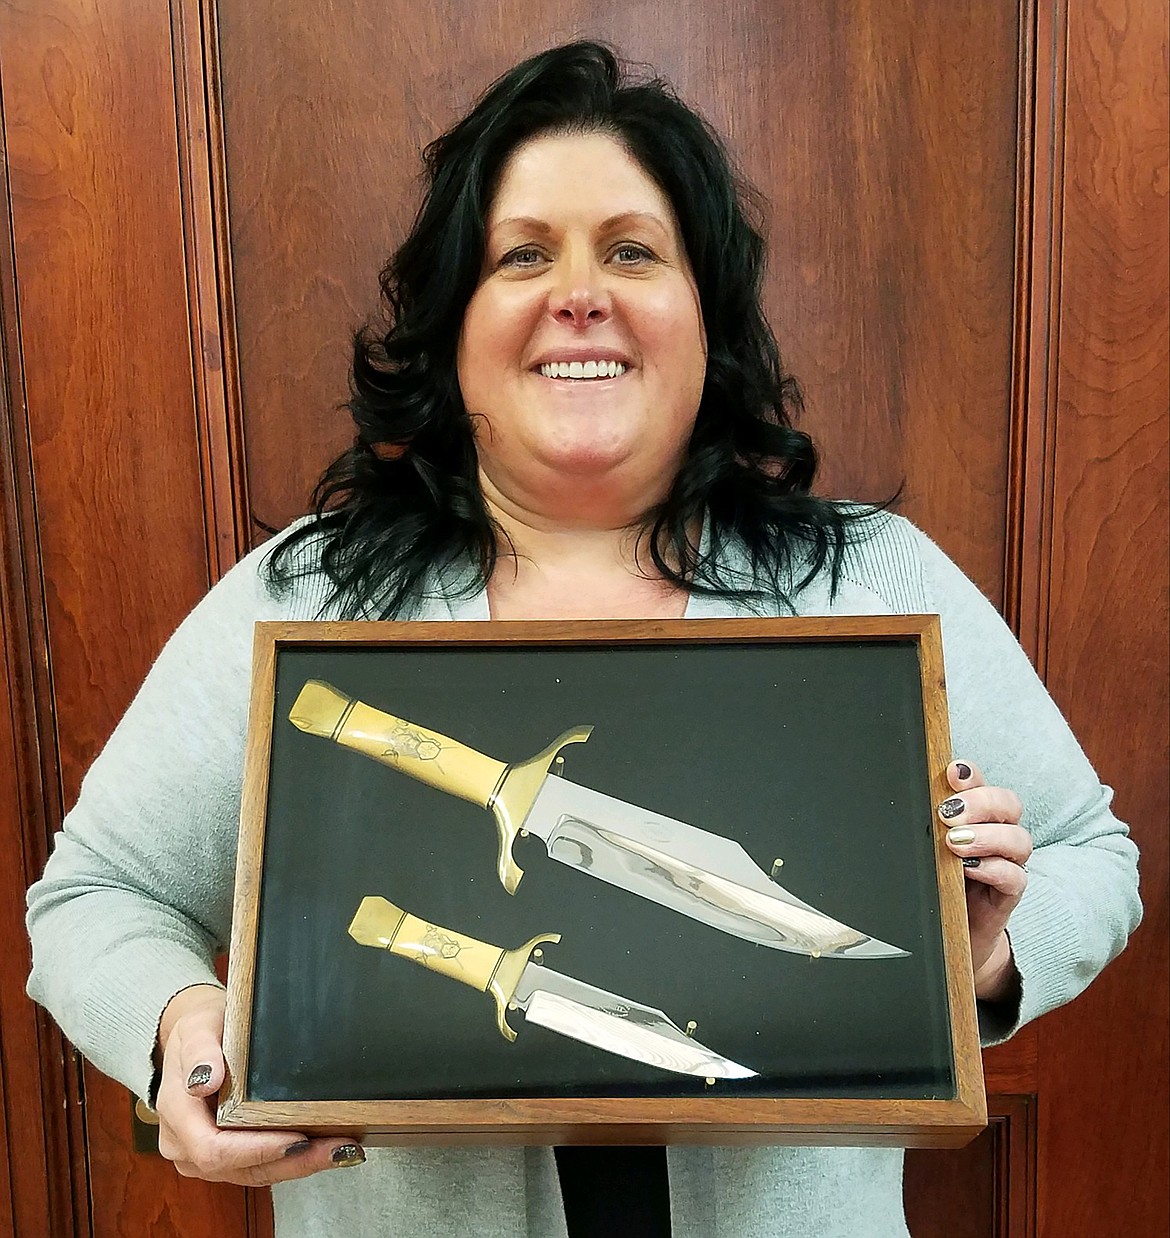 Winner of the first-place prize, a custom knife set, was Teresa Skeen